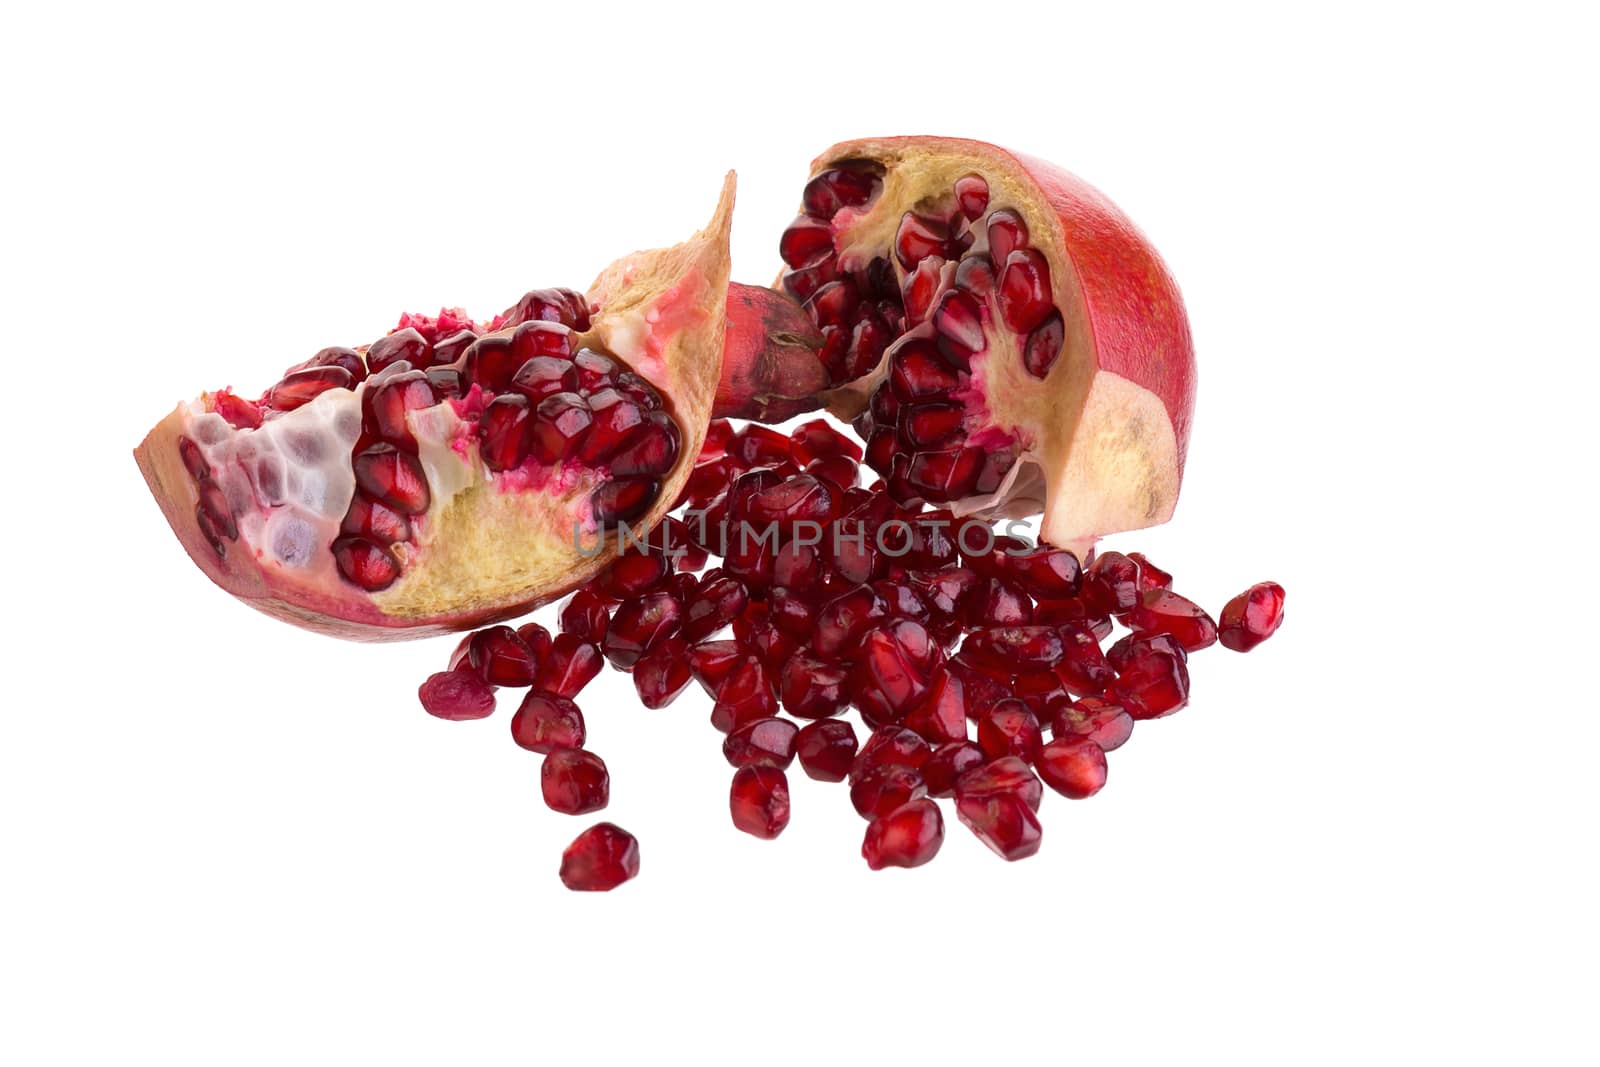 Pomegranate isolated on a white background by kaiskynet